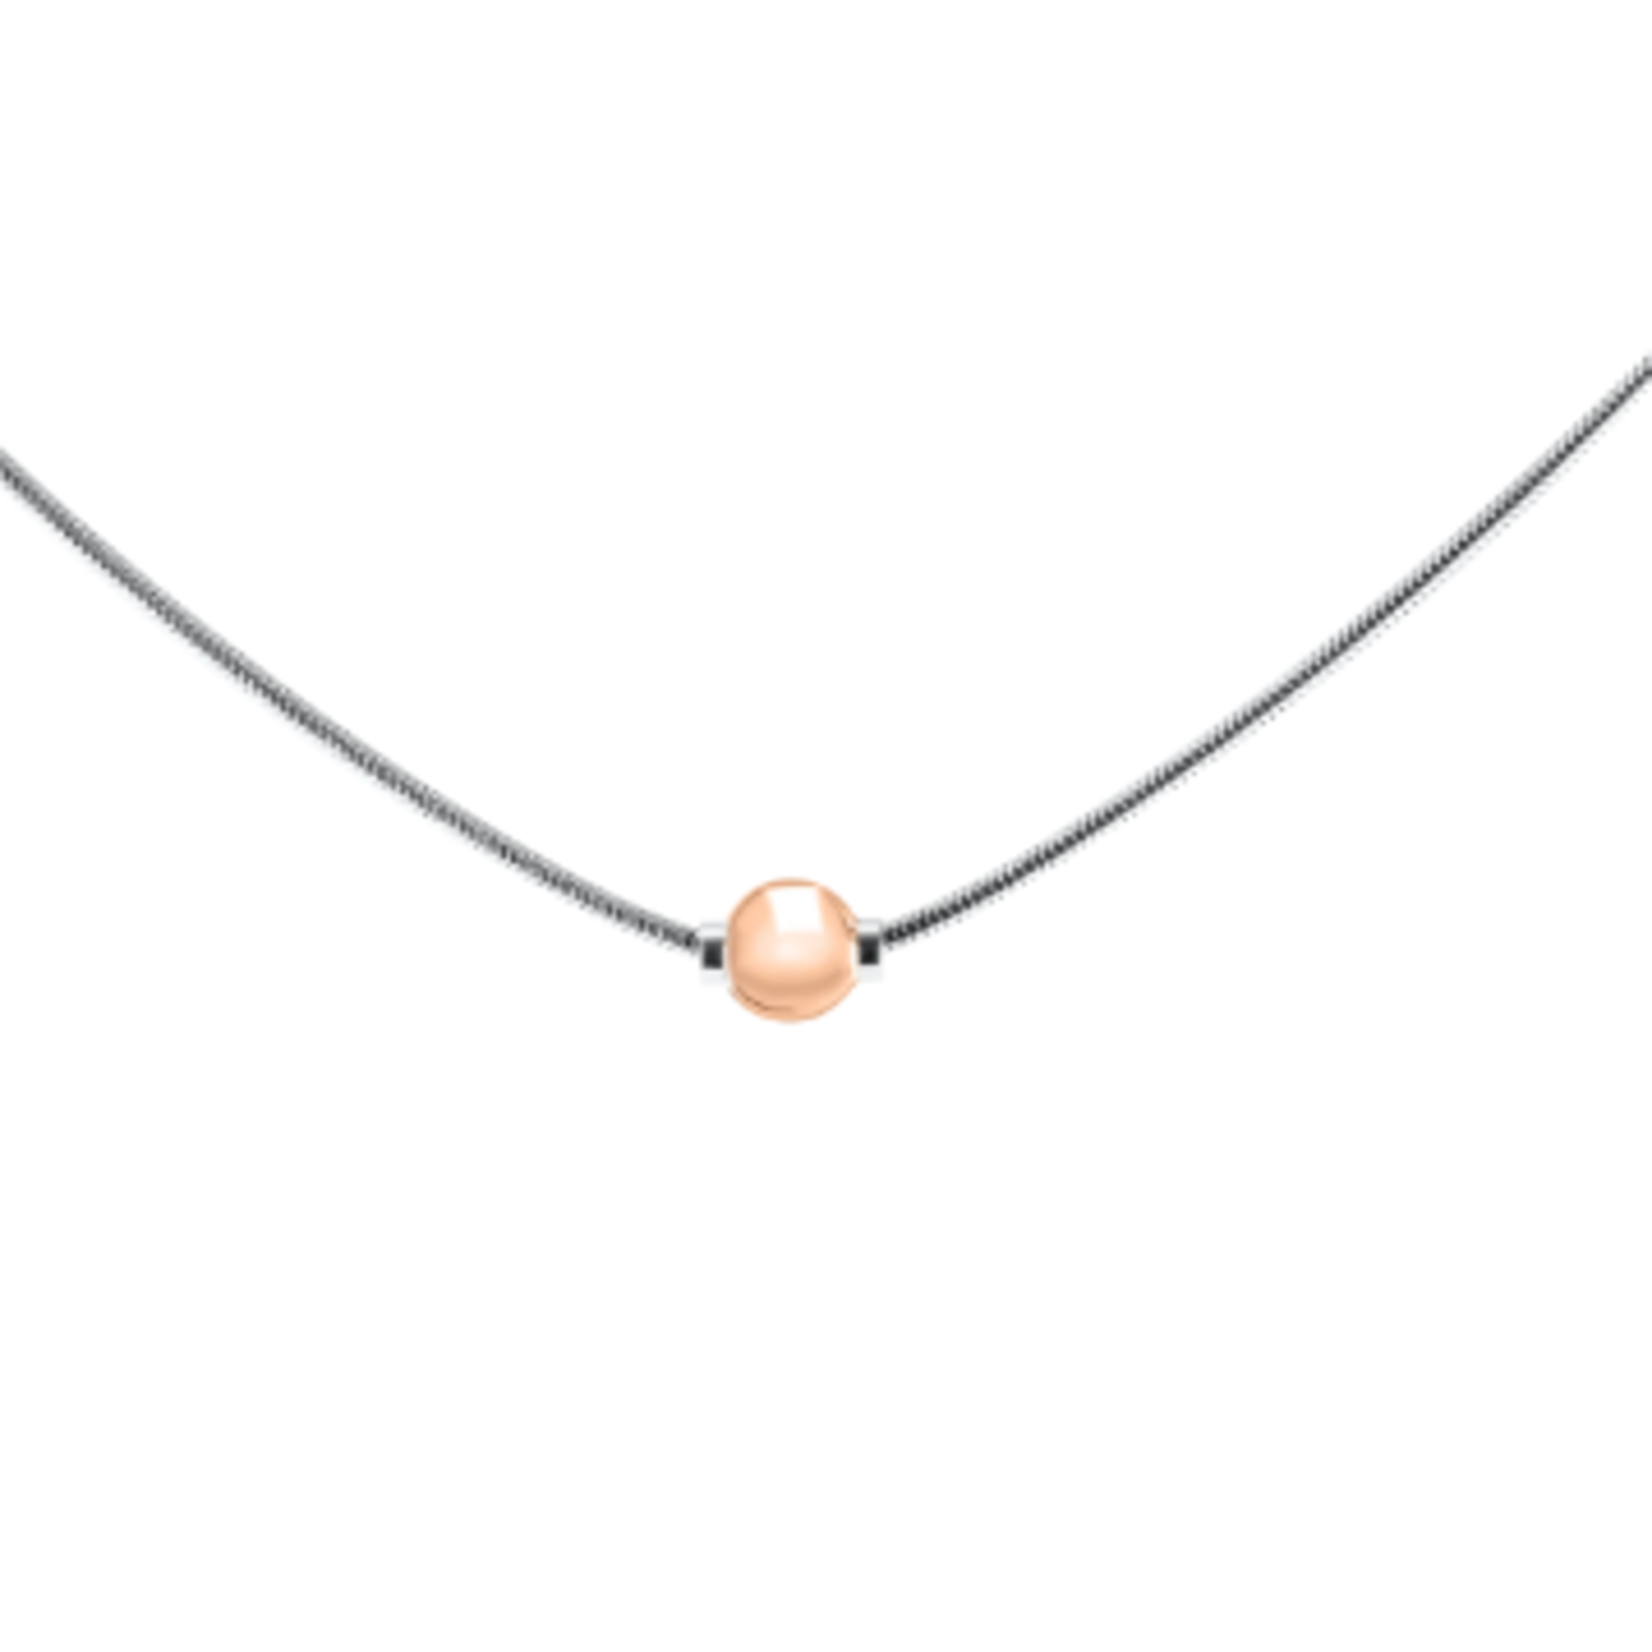 Marathon Jewelry Cape Cod Necklace, 14K Rose Gold Bead on 16" Sterling Snake Chain